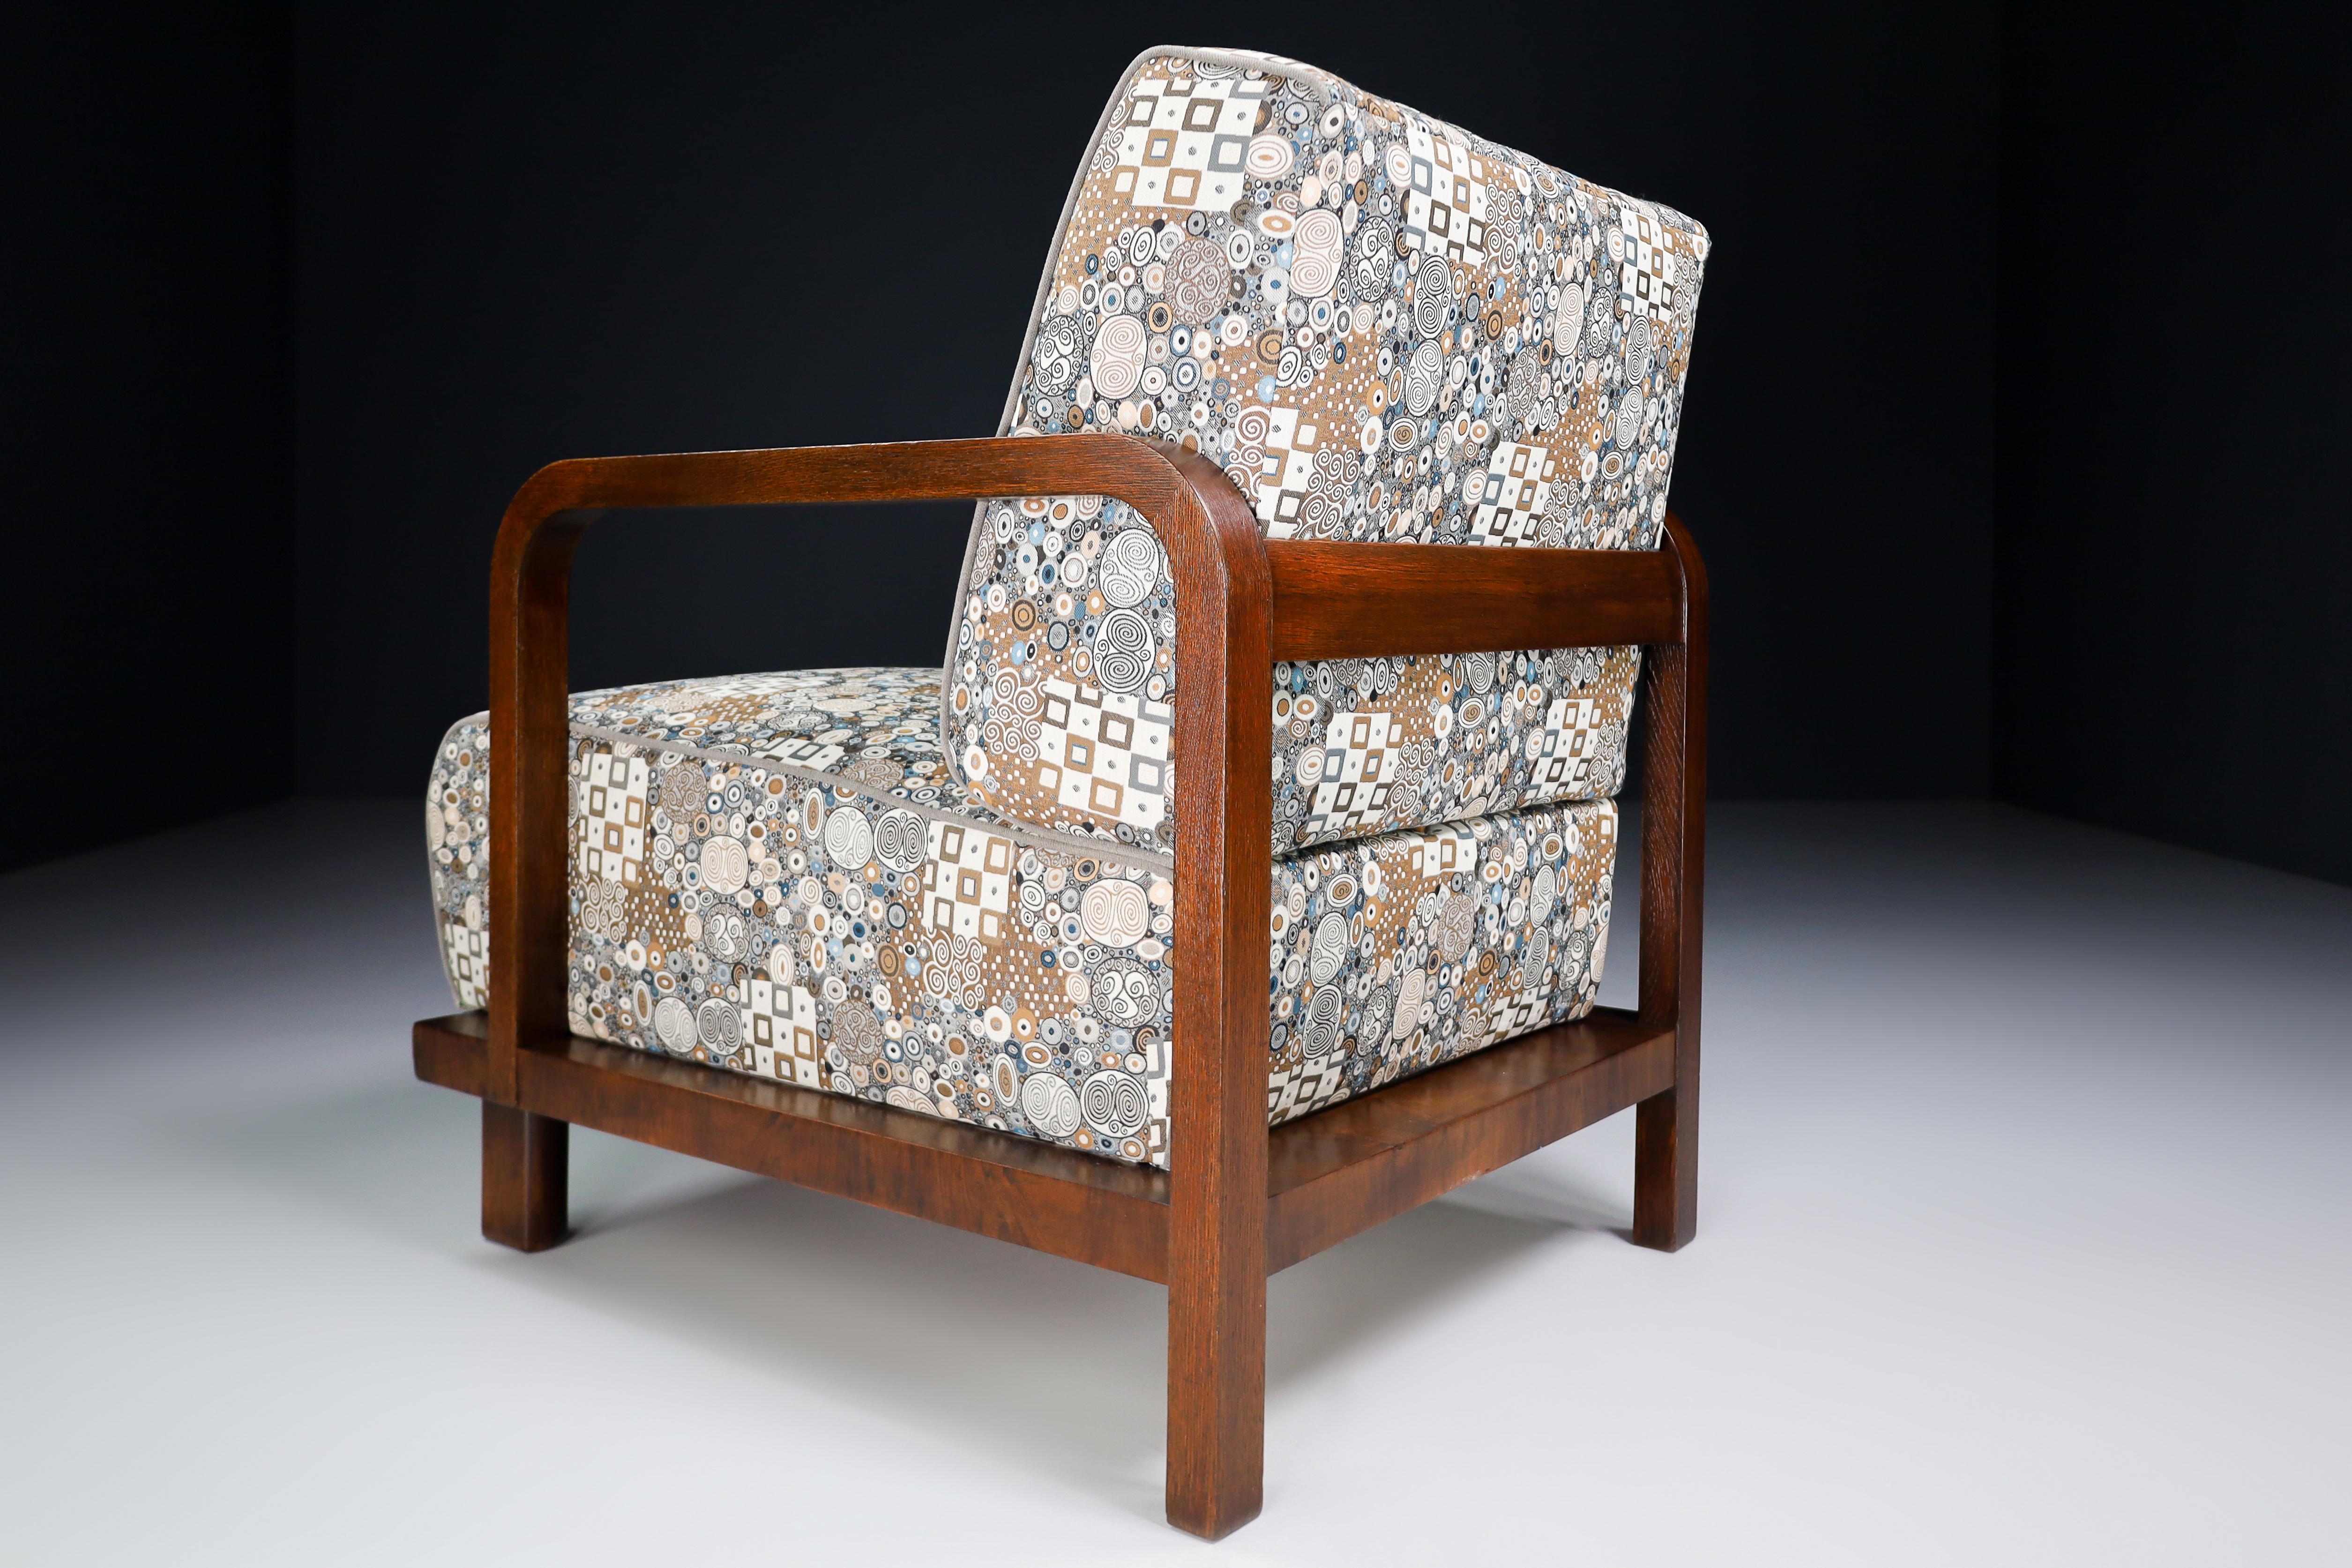 Czech Art-Deco Oak Armchairs in Reupholstered in Fabric, Praque, 1930s